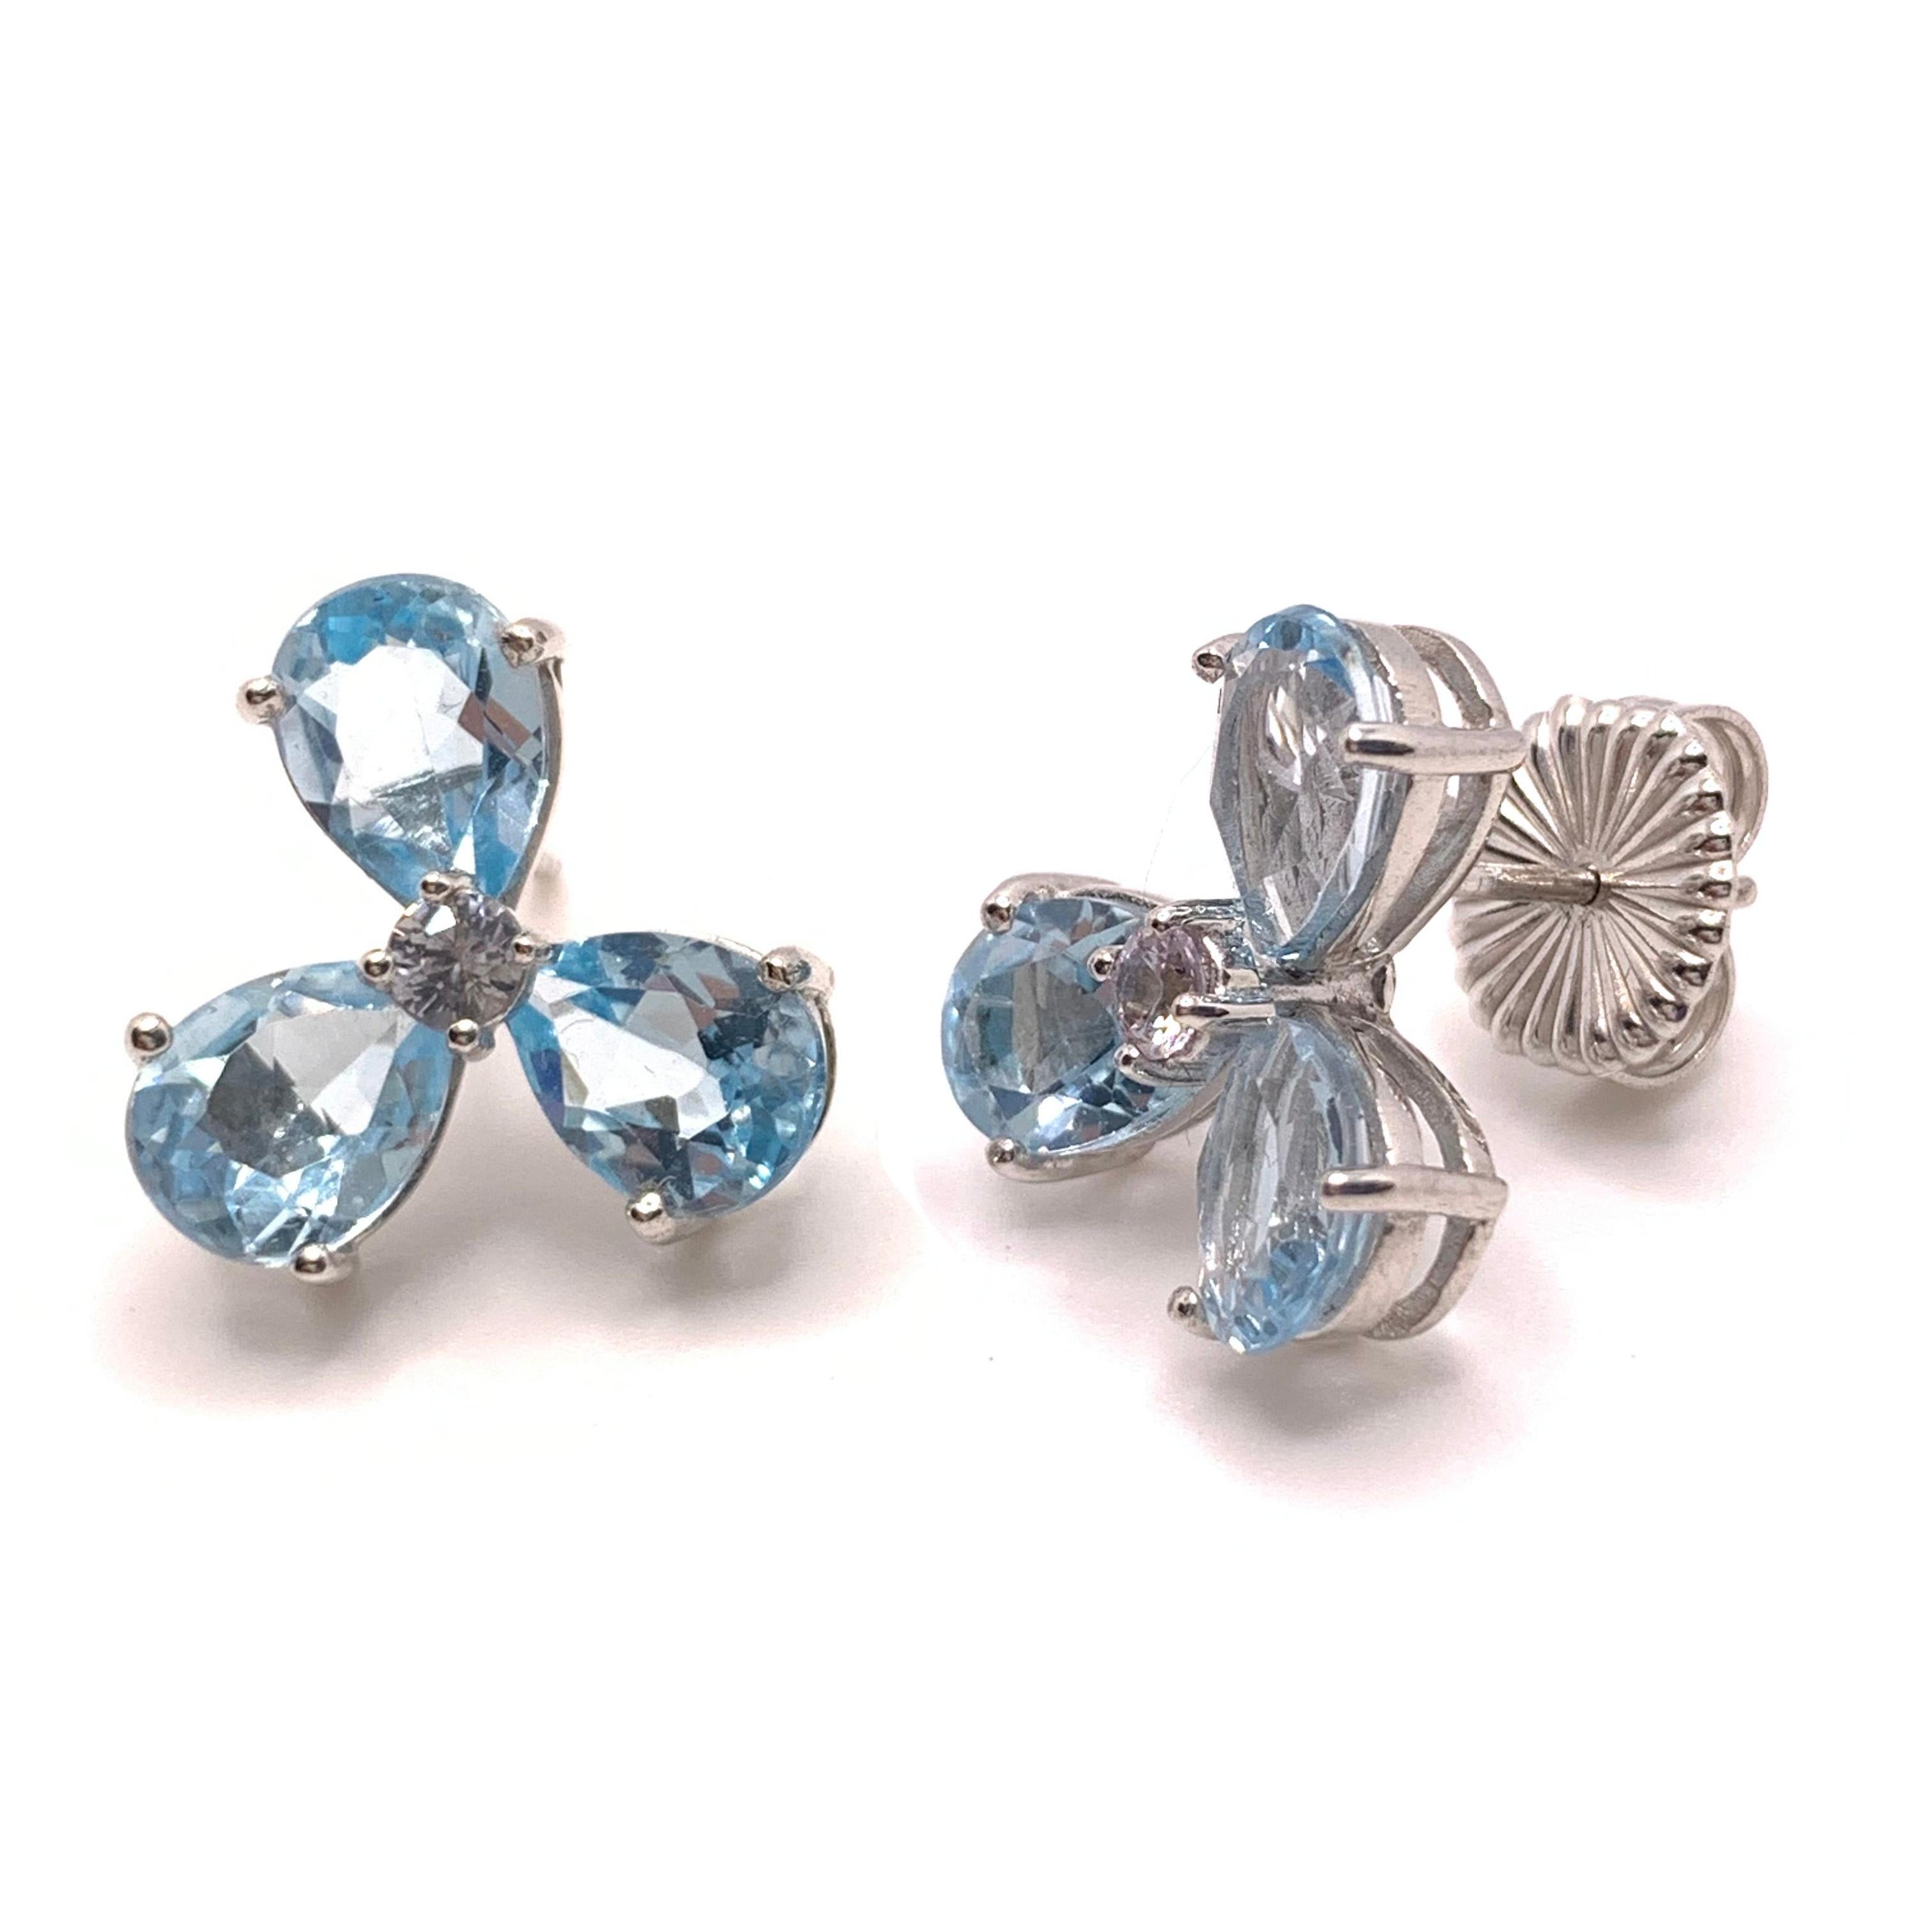 These stunning pair of earrings feature genuine pear-shape blue topaz and round white sapphire handset in platinum rhodium plated sterling silver, straight post with large friction earring back. The post is set slightly above the center of the